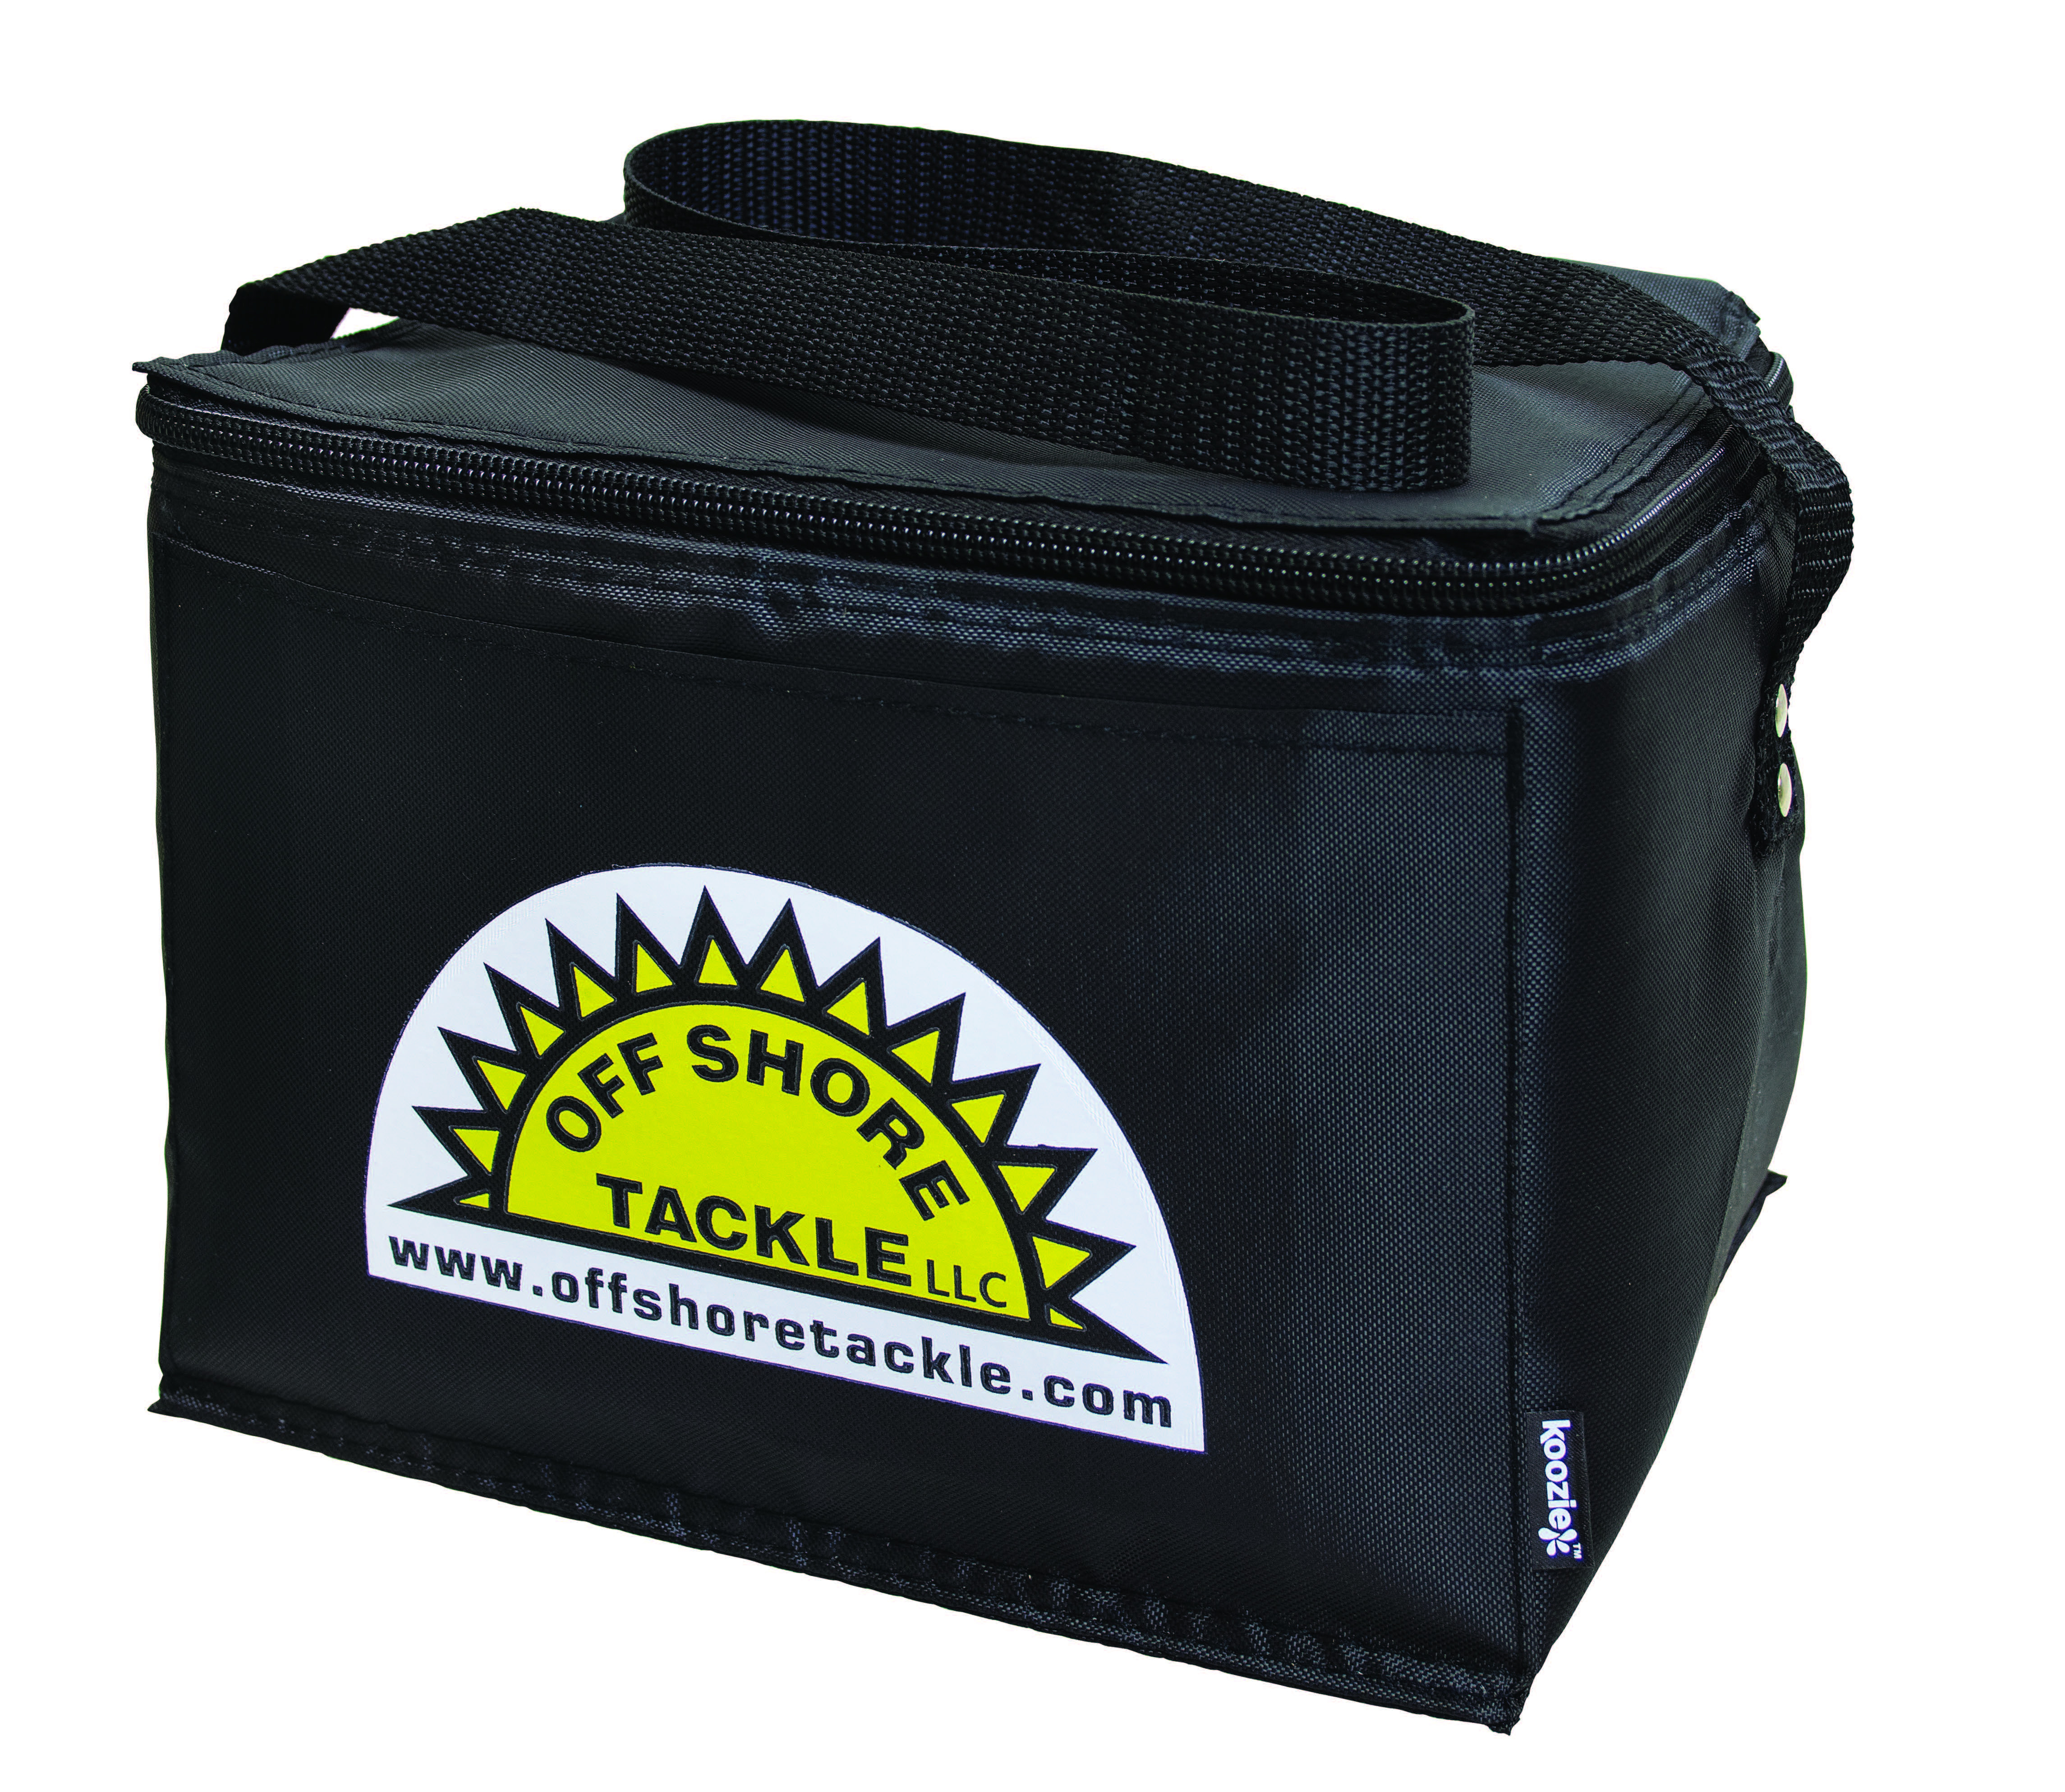 Off Shore Tackle Black Soft 6 Pack Cooler With Front Pocket And